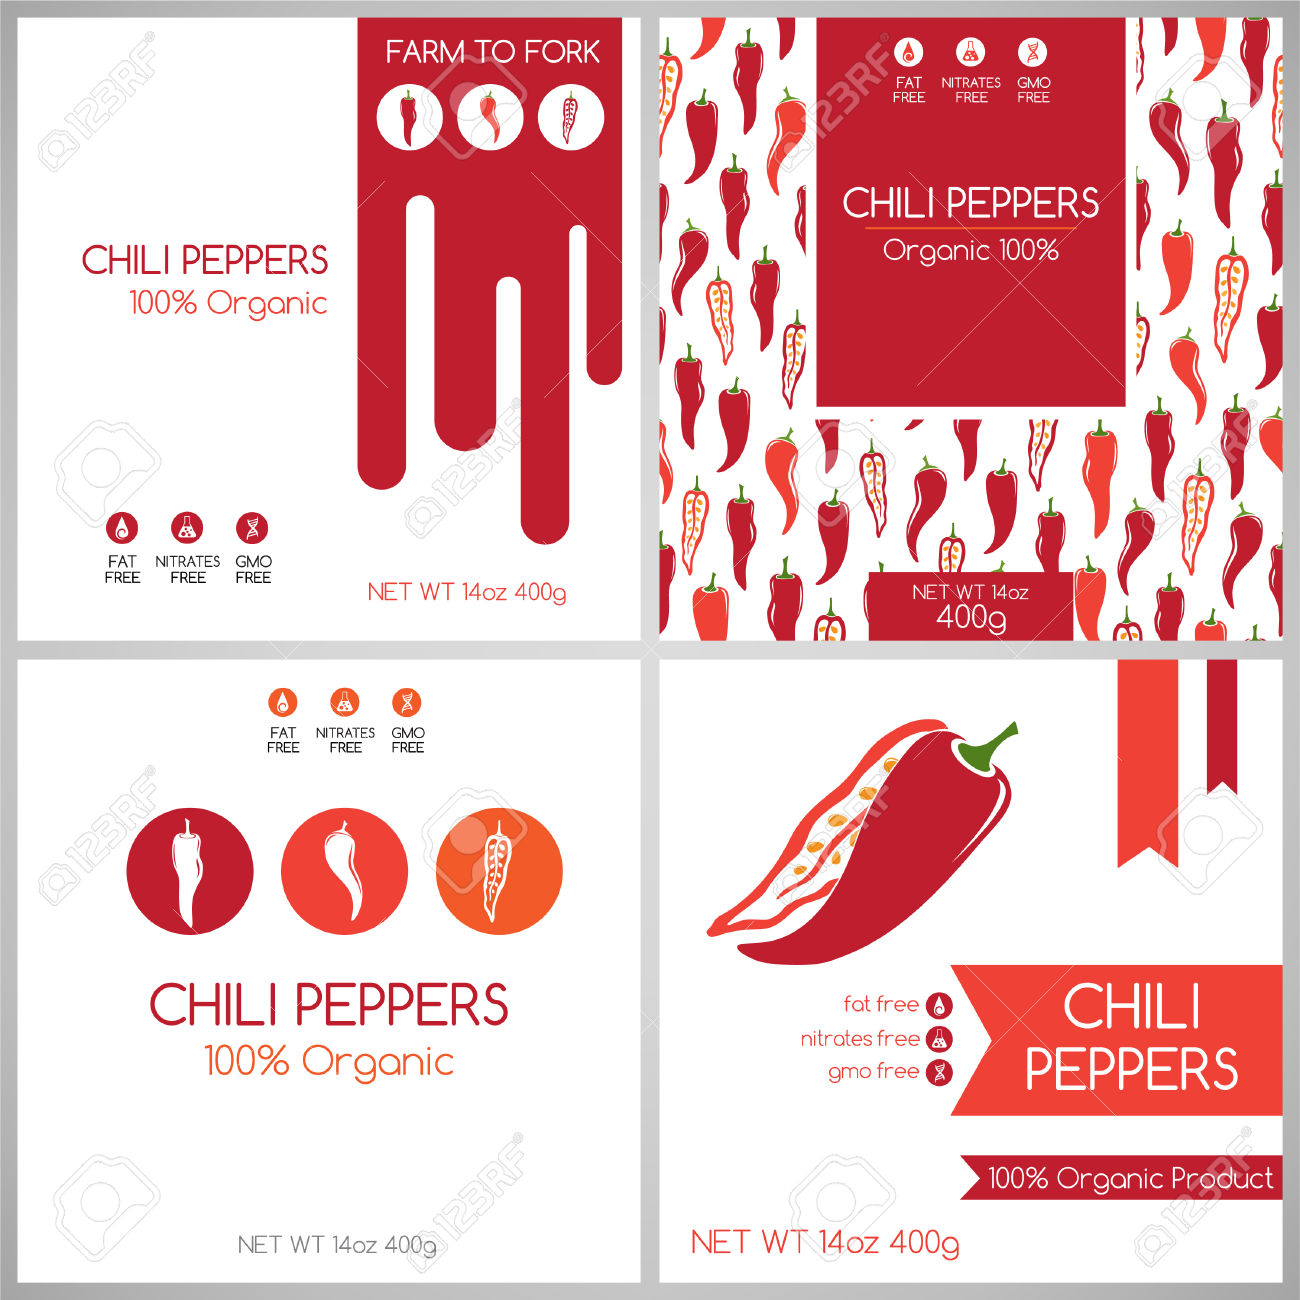 CHILLI PEPPER FARMING AND SALES BUSINESS PLAN IN NIGERIA